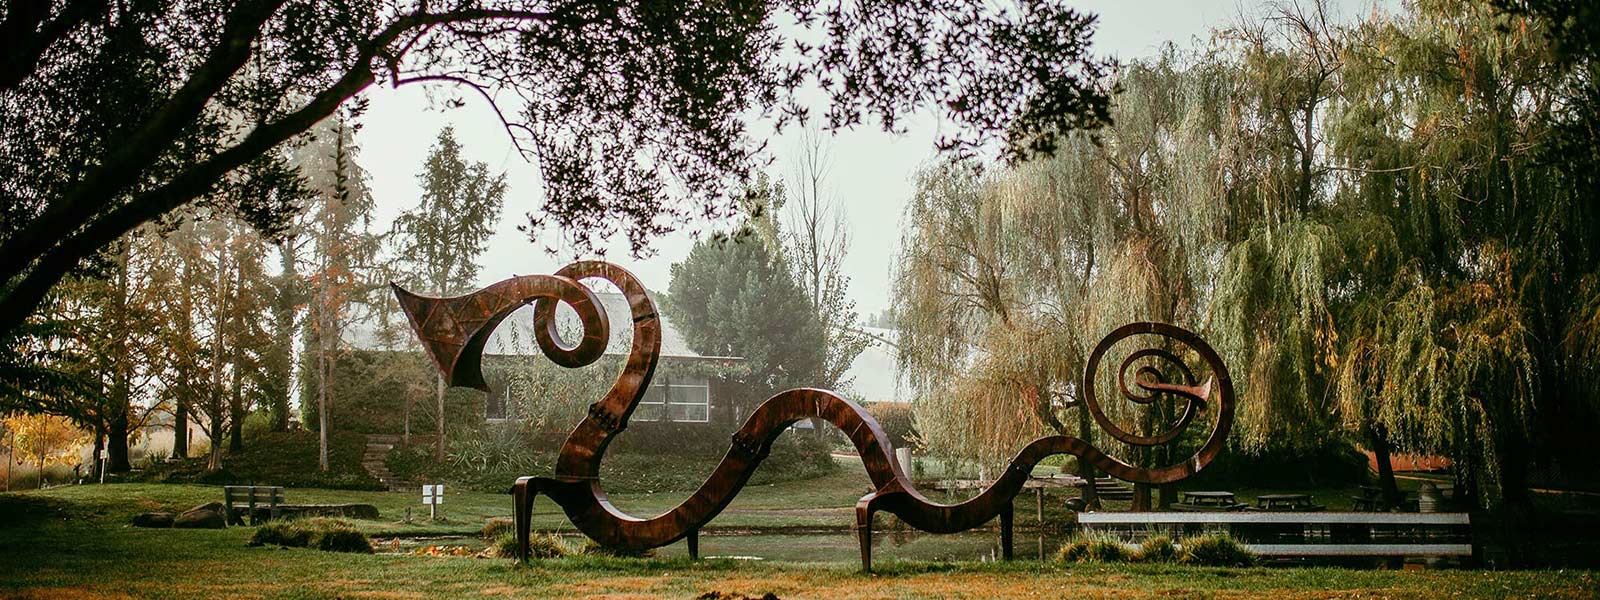 Serpent sculpture by our central pond